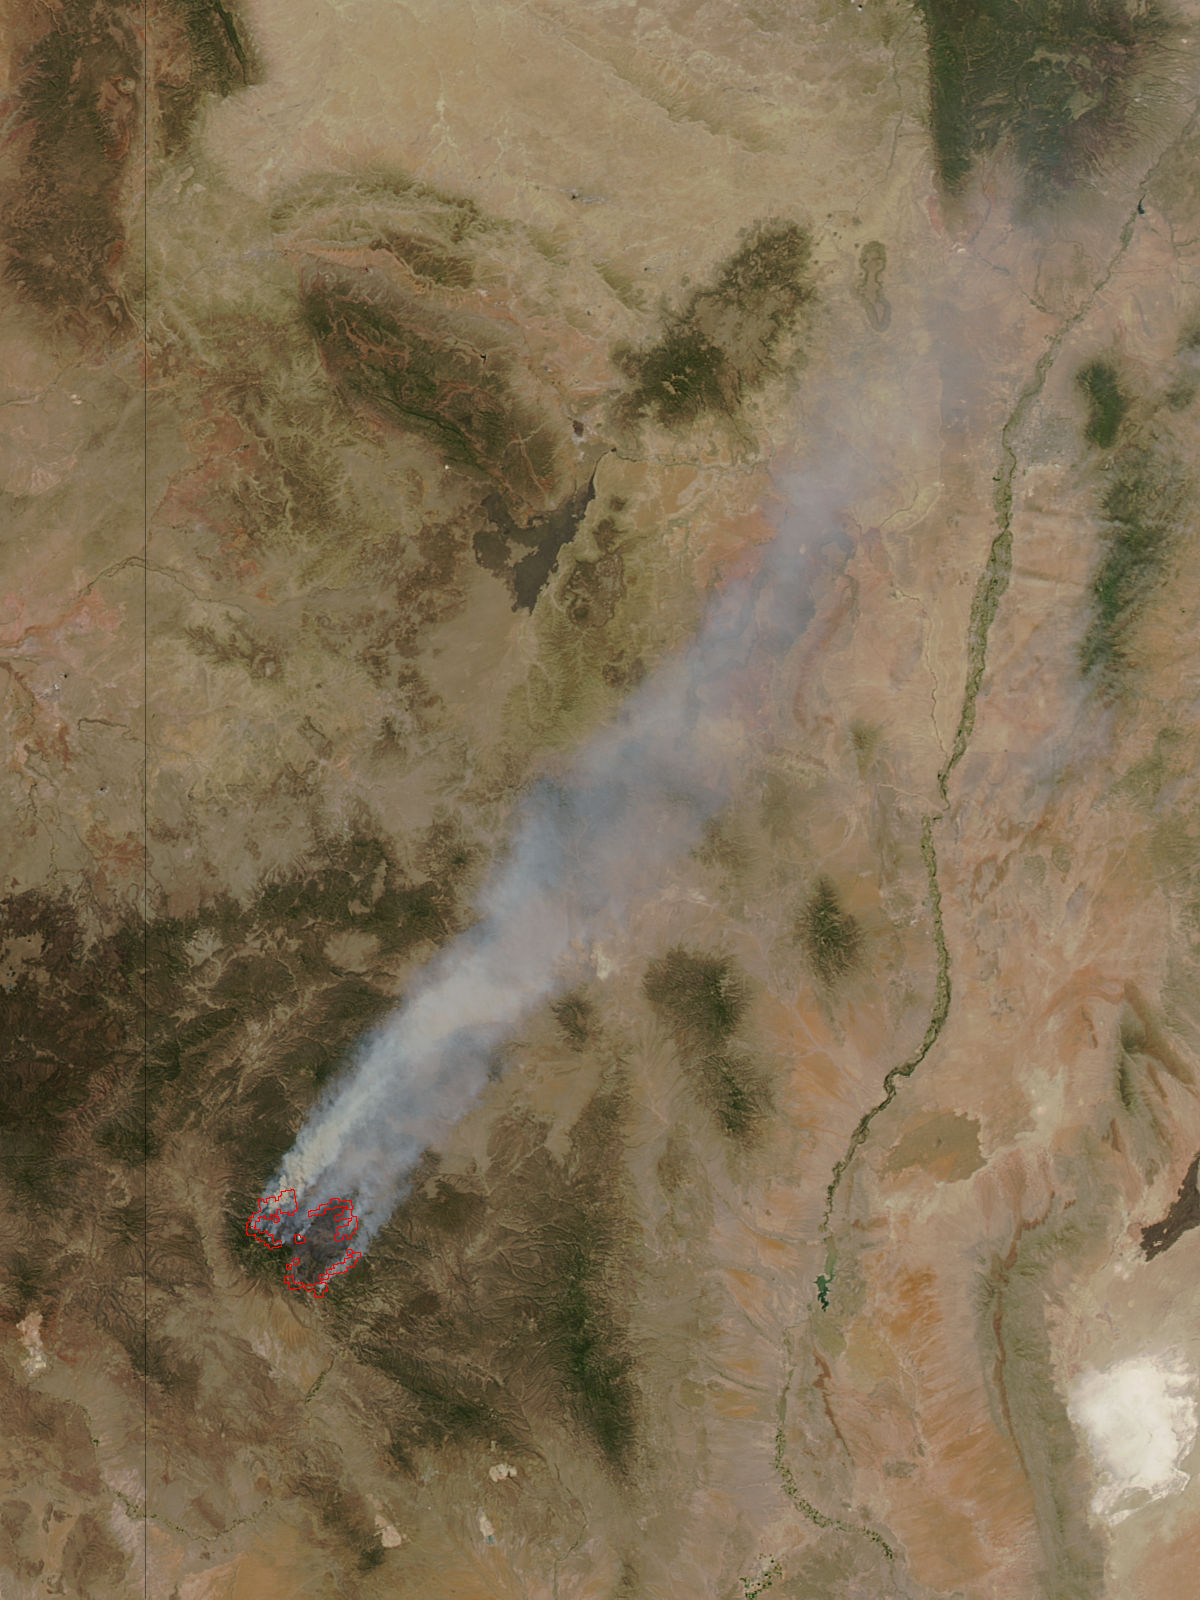 Whitewater and Baldy fires, New Mexico - related image preview